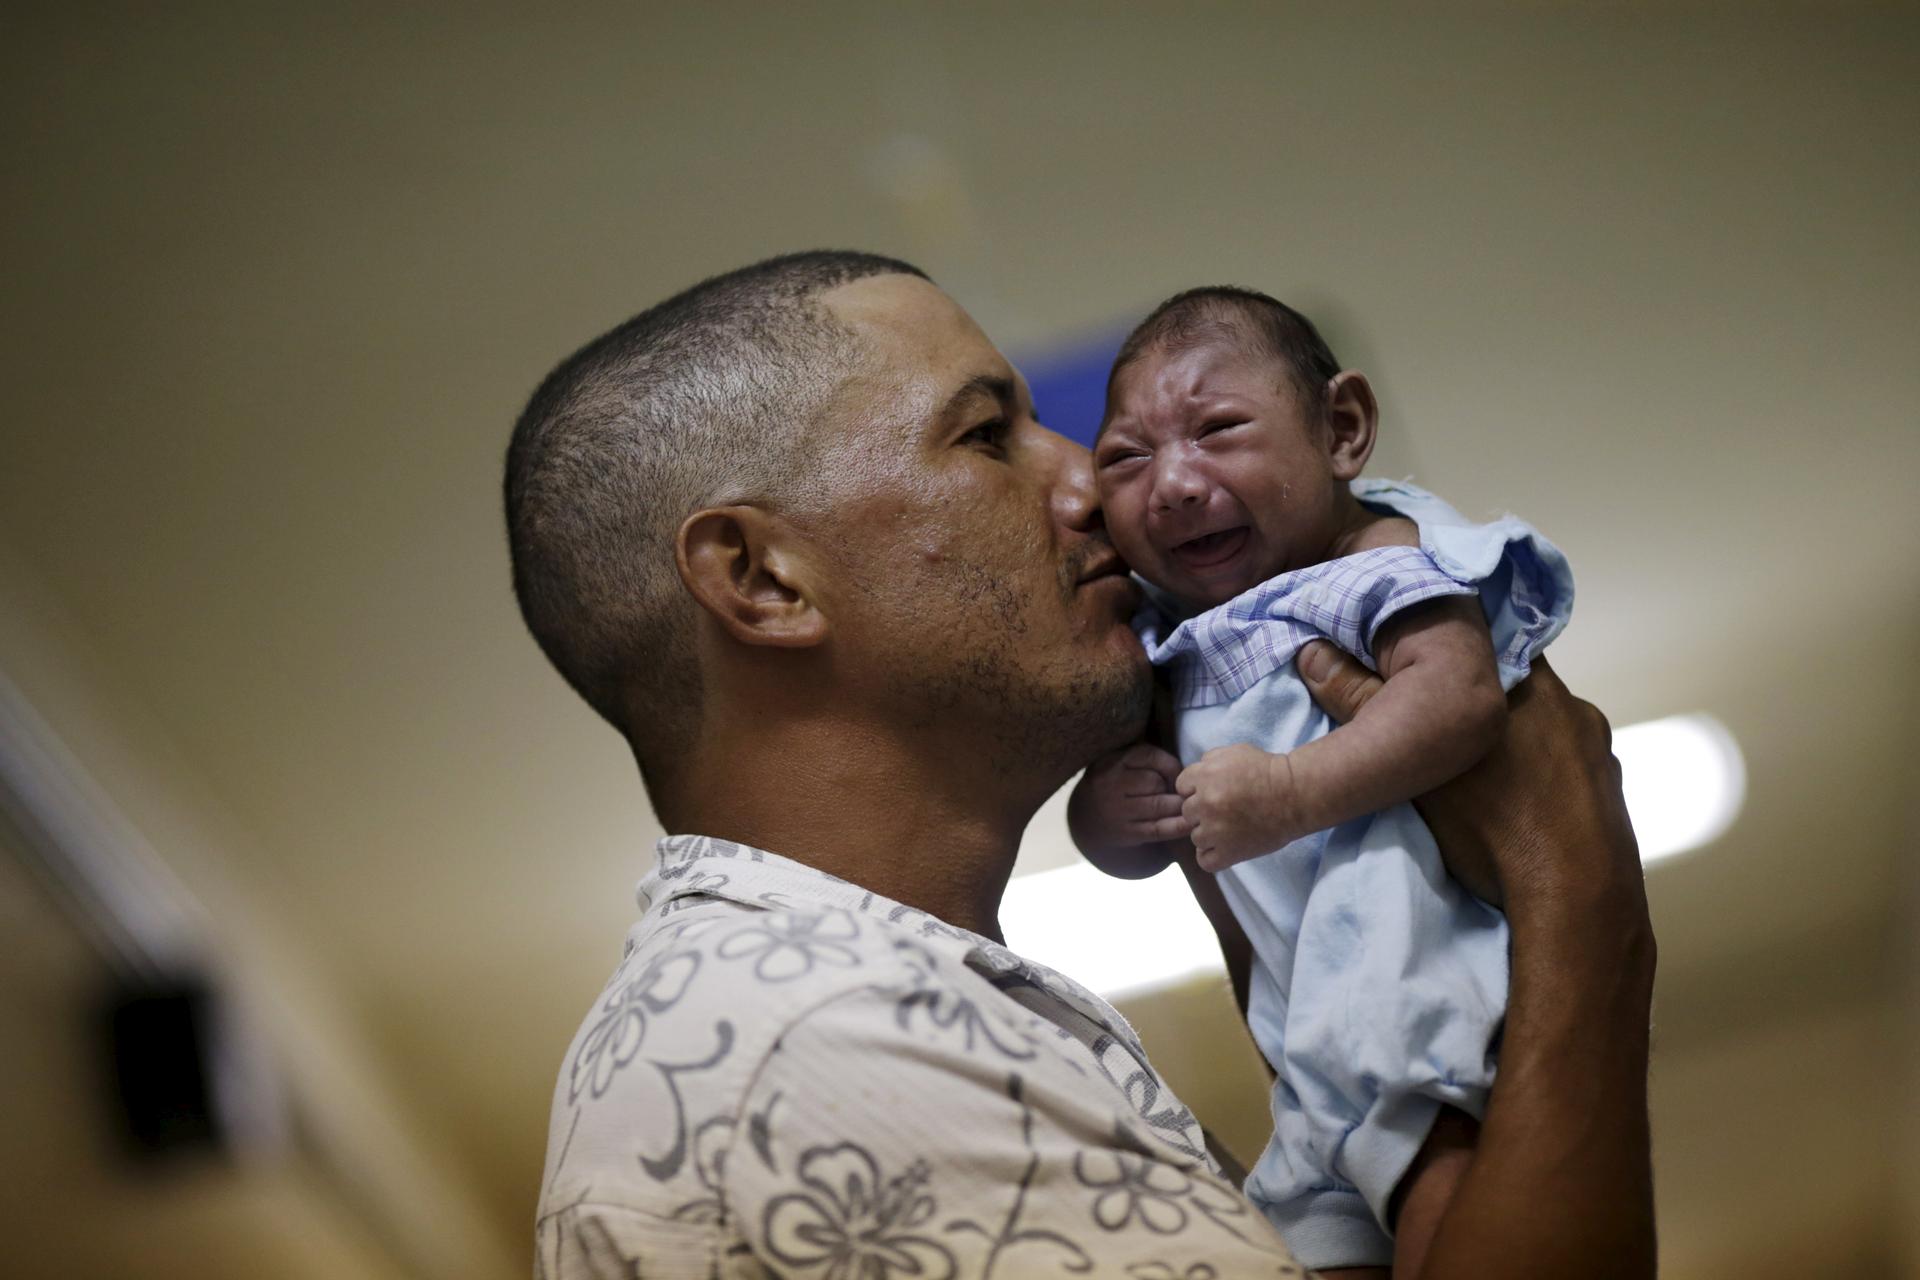 Geovane Silva holds his son Gustavo Henrique, who has microcephaly, in Recife, Brazil. Health authorities in the Brazilian state at the center of a rapidly spreading Zika outbreak have been overwhelmed by the alarming surge in cases of babies born with mi